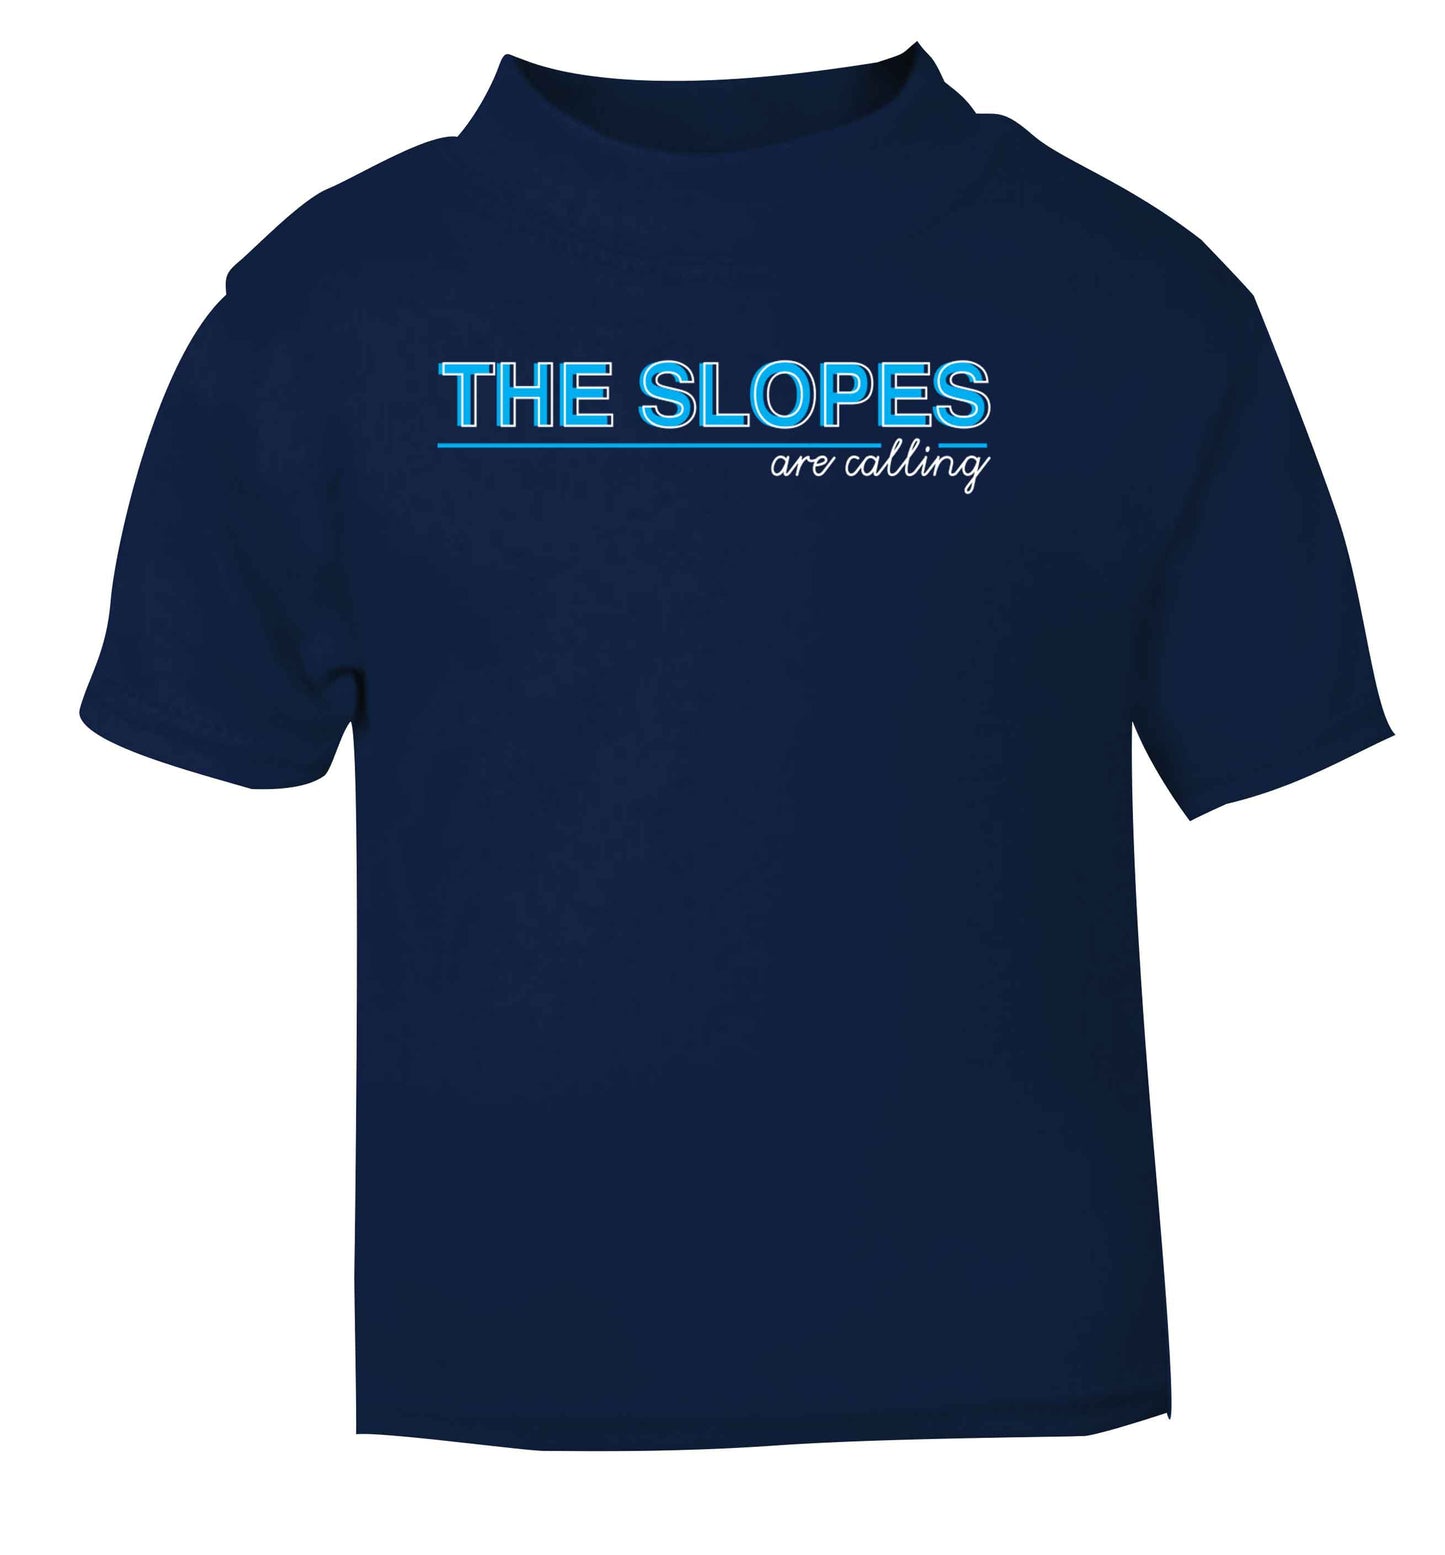 The slopes are calling navy Baby Toddler Tshirt 2 Years